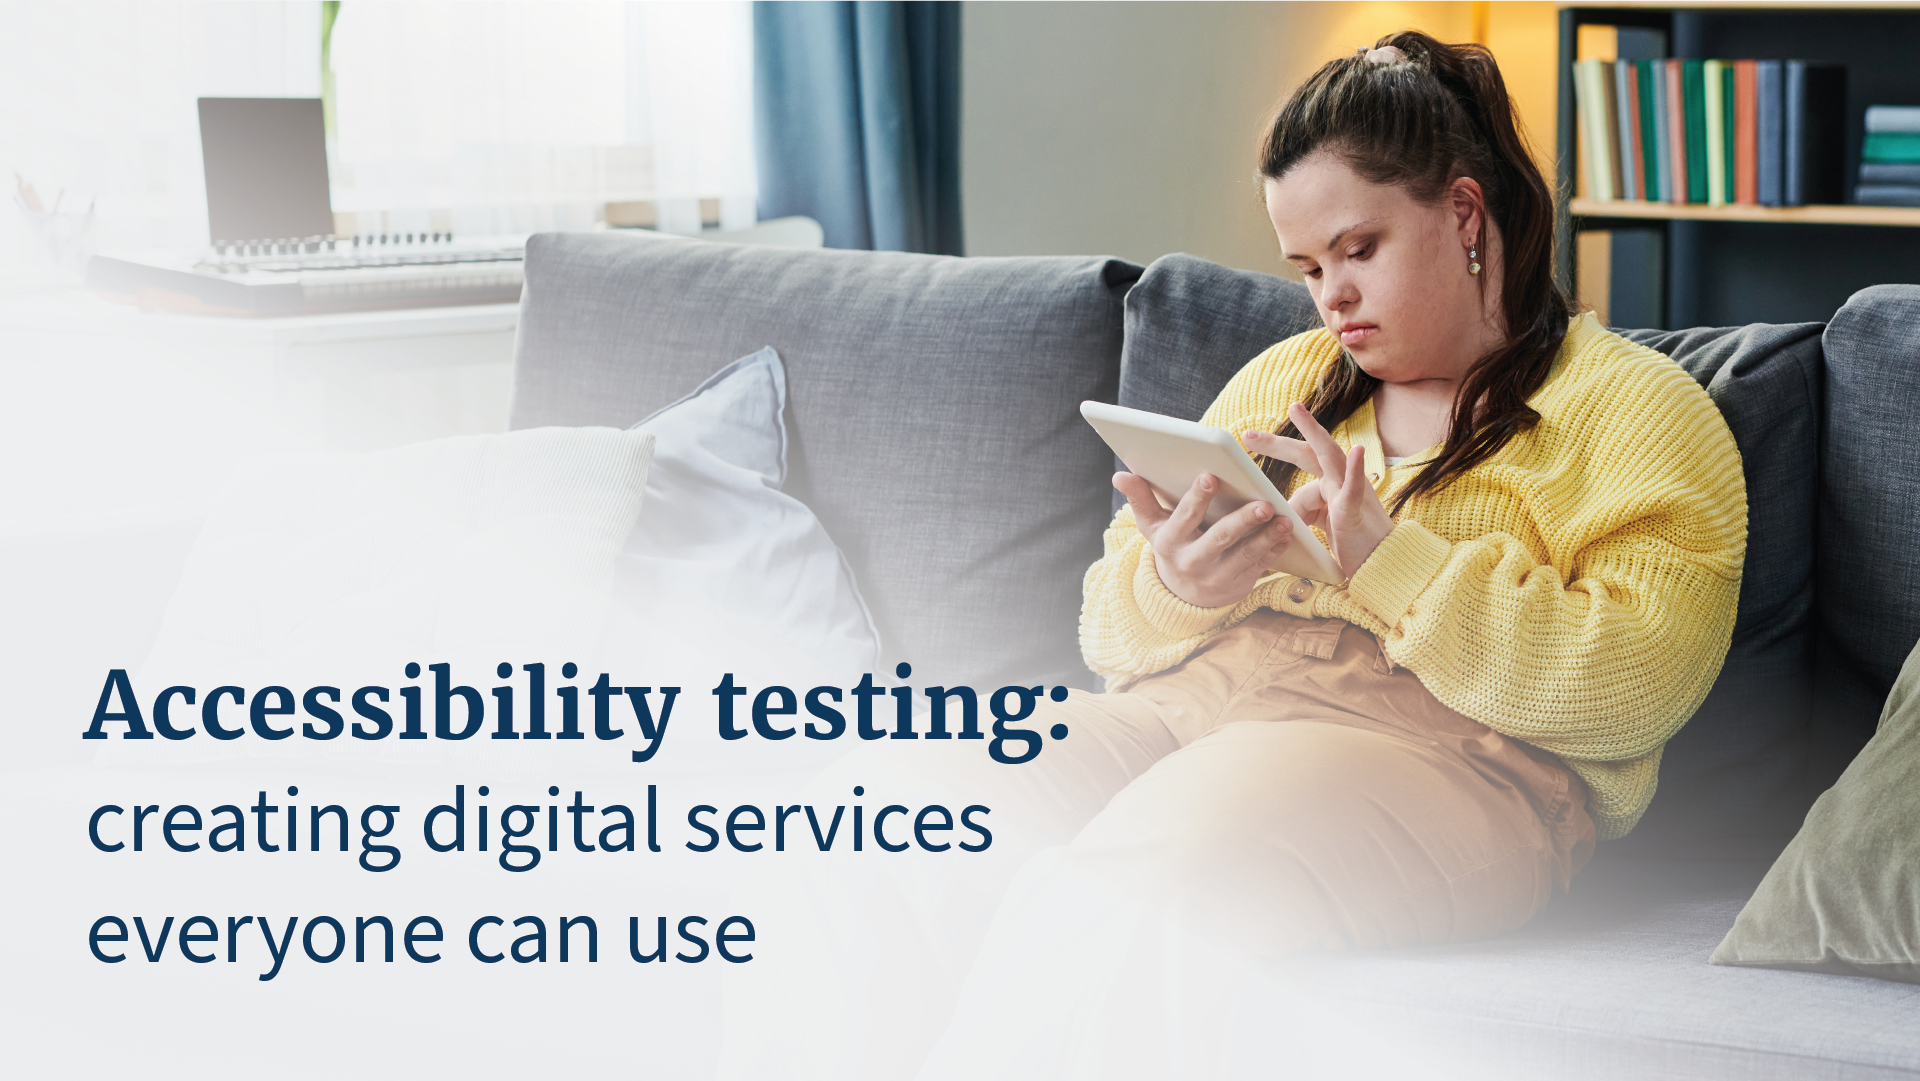 Accessibility testing: creating digital services everyone can use